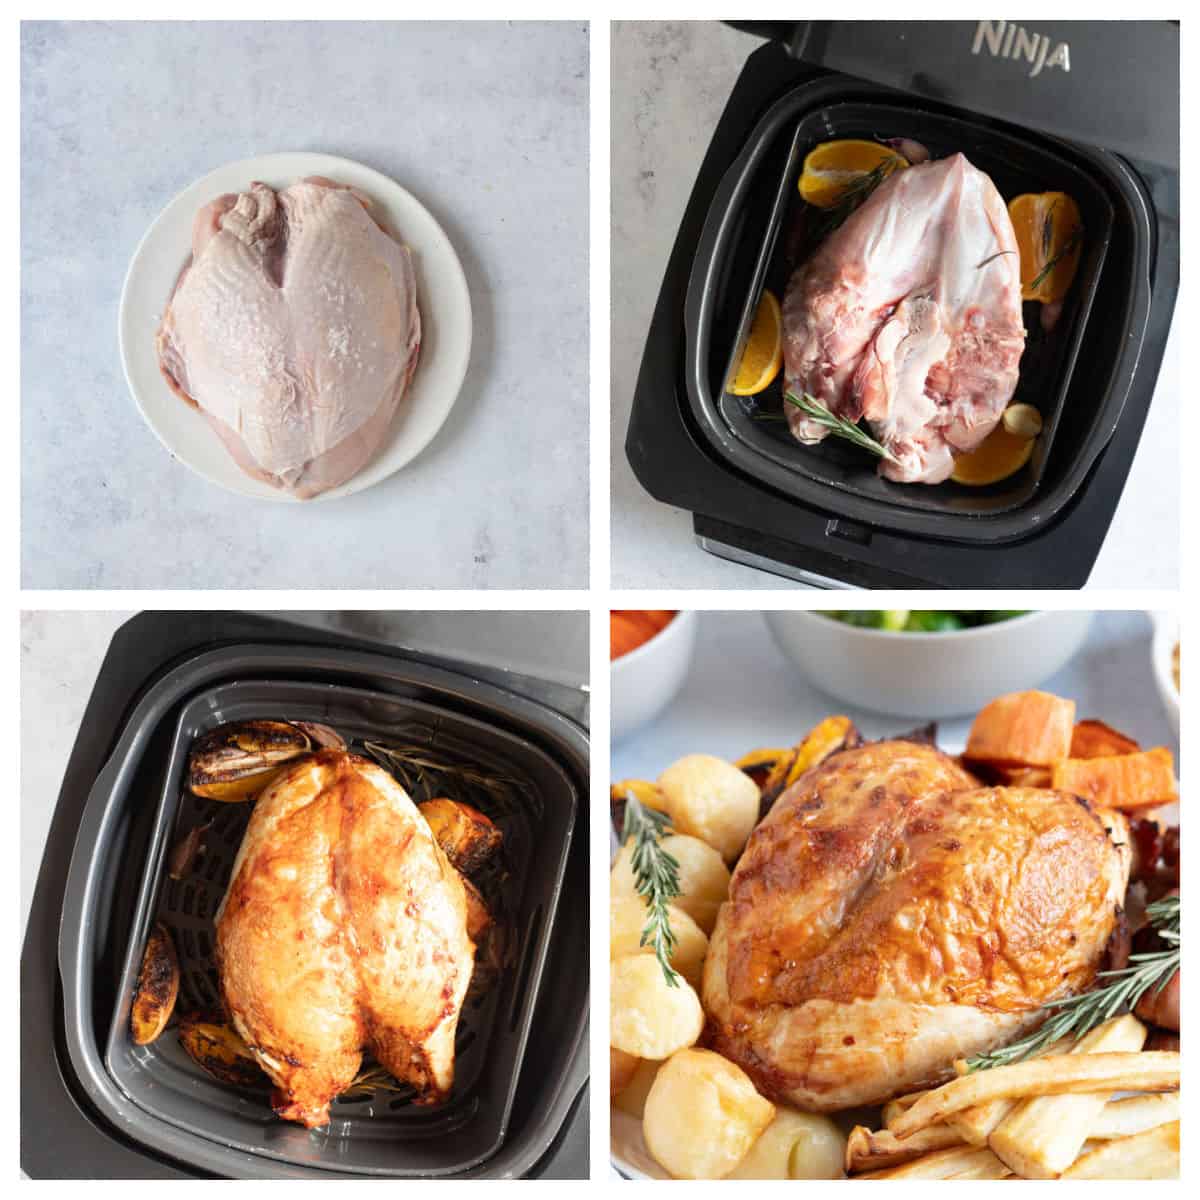 Step by step photo instructions for air frying a turkey crown.